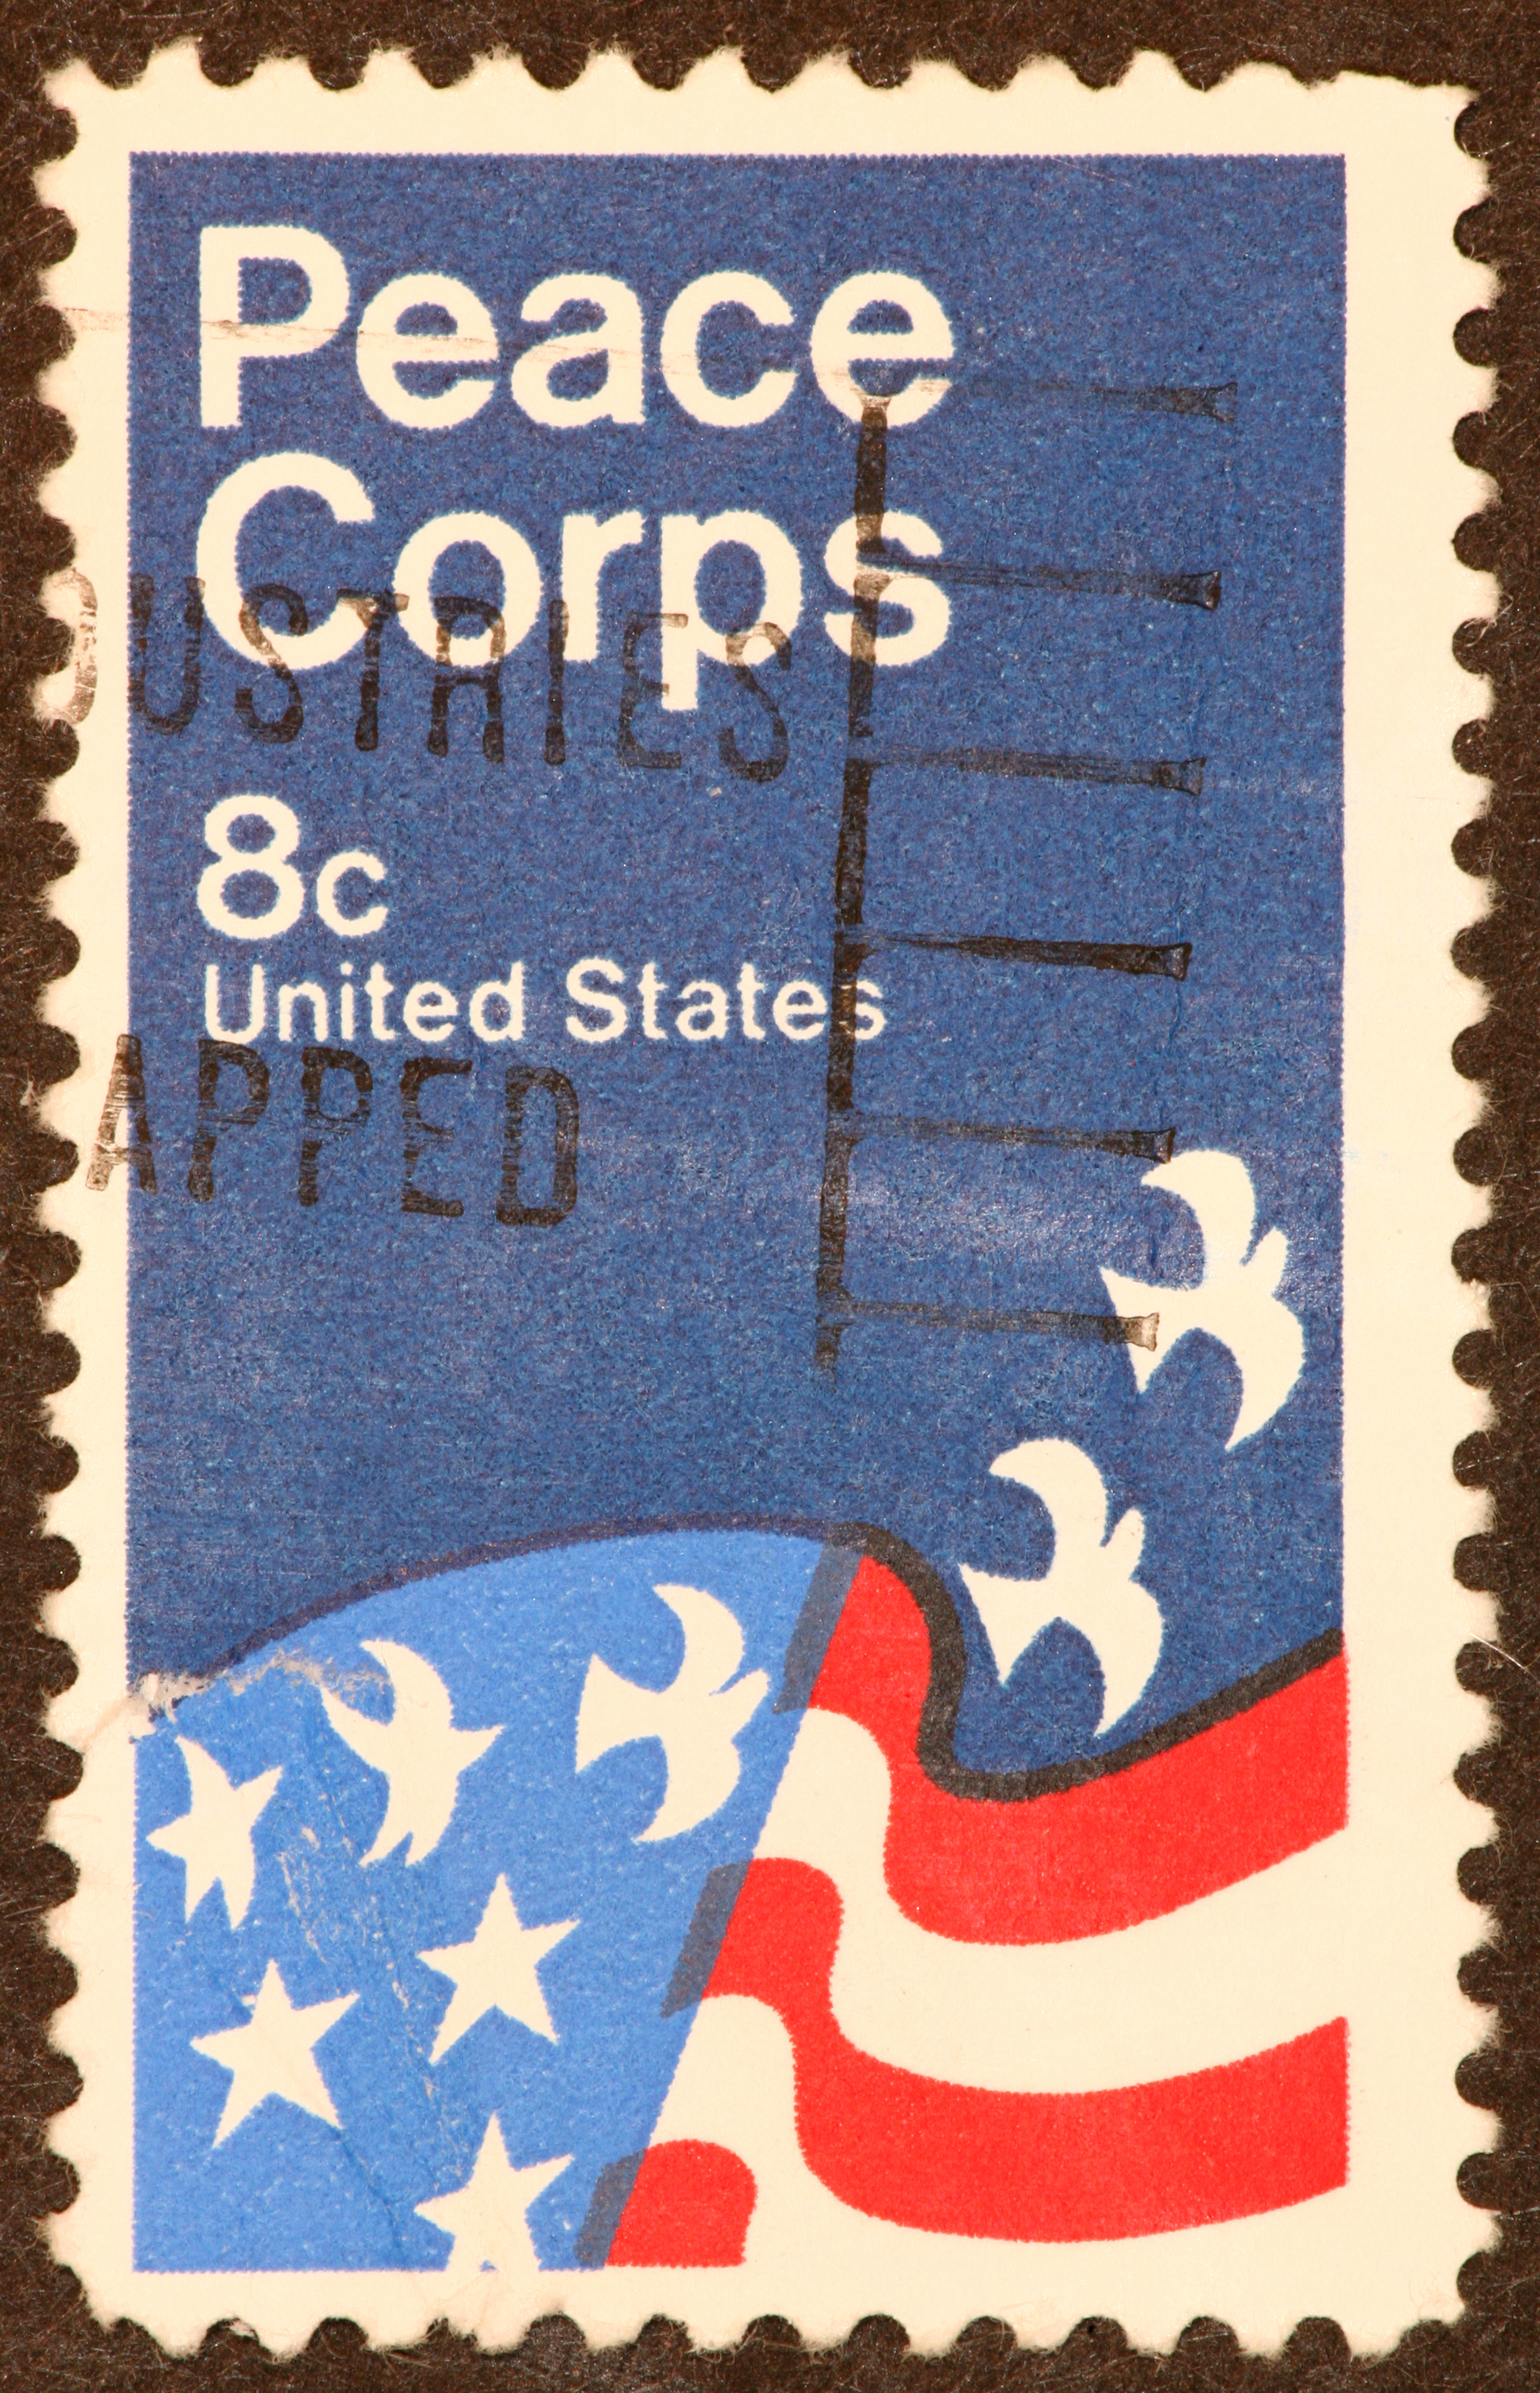 1960s postage stamp commemorating the Peace Corps. (raclro&mdash;Getty Images/iStockphoto)